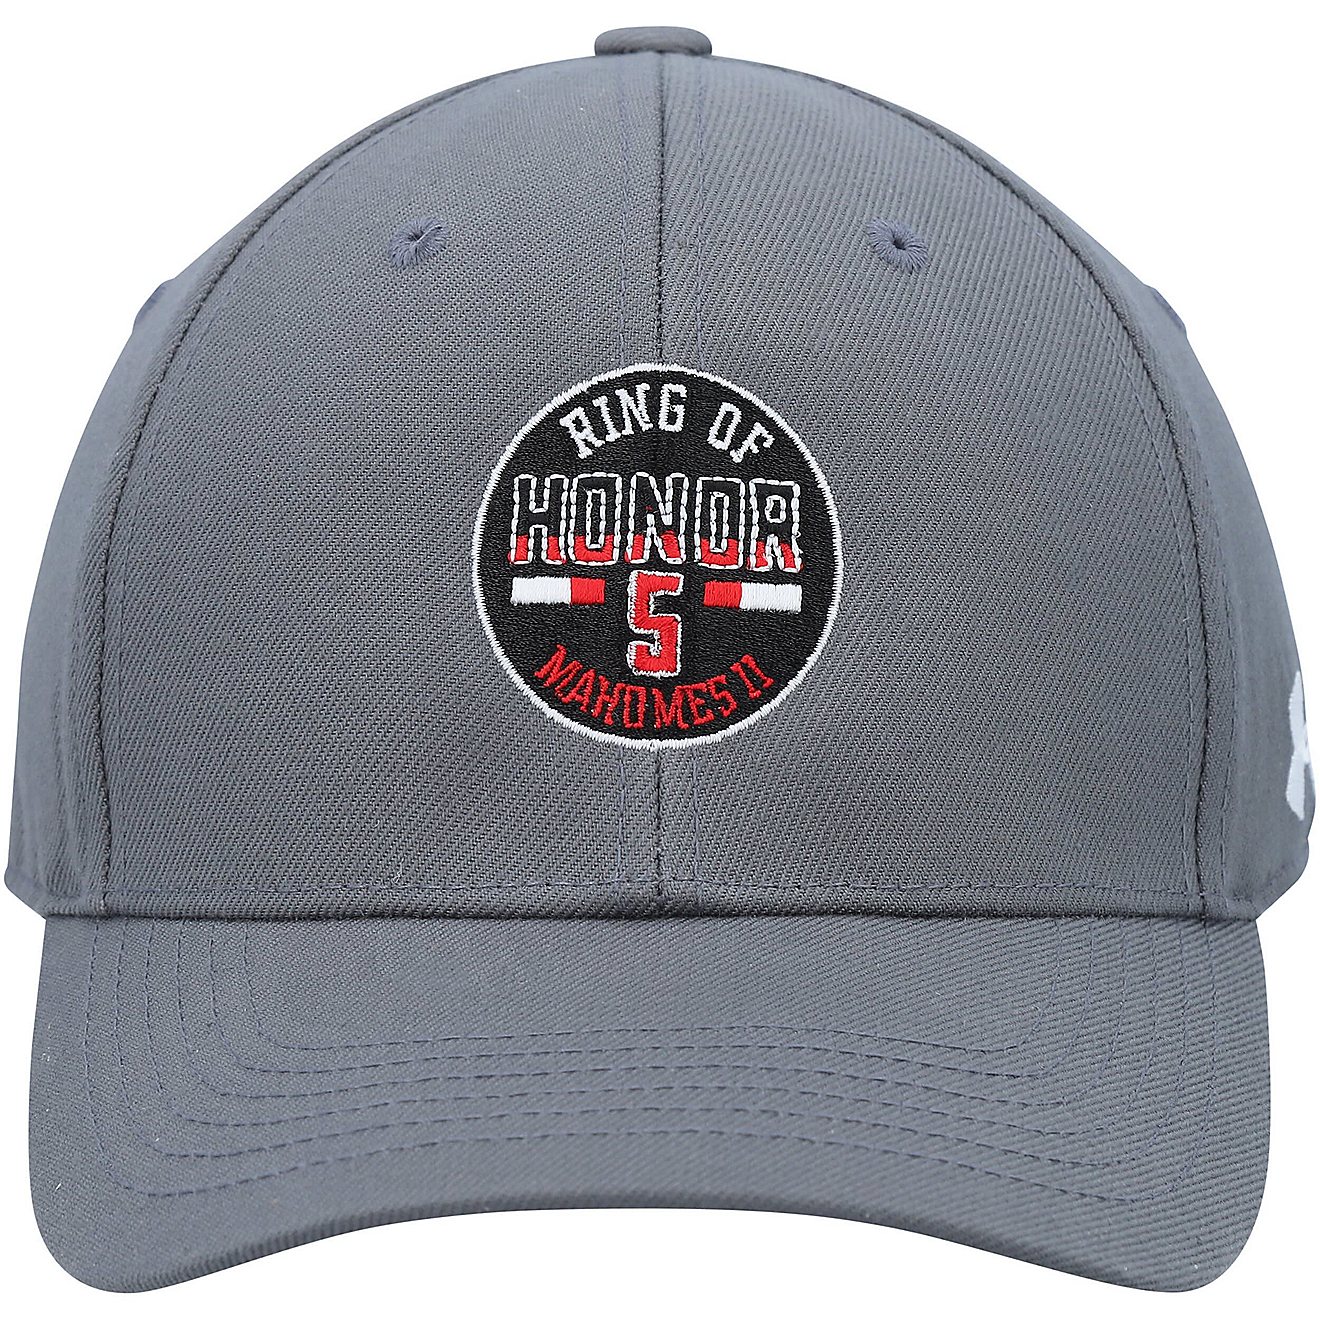 Under Armour Patrick Mahomes Texas Tech Raiders Ring of Honor Adjustable Hat                                                     - view number 2